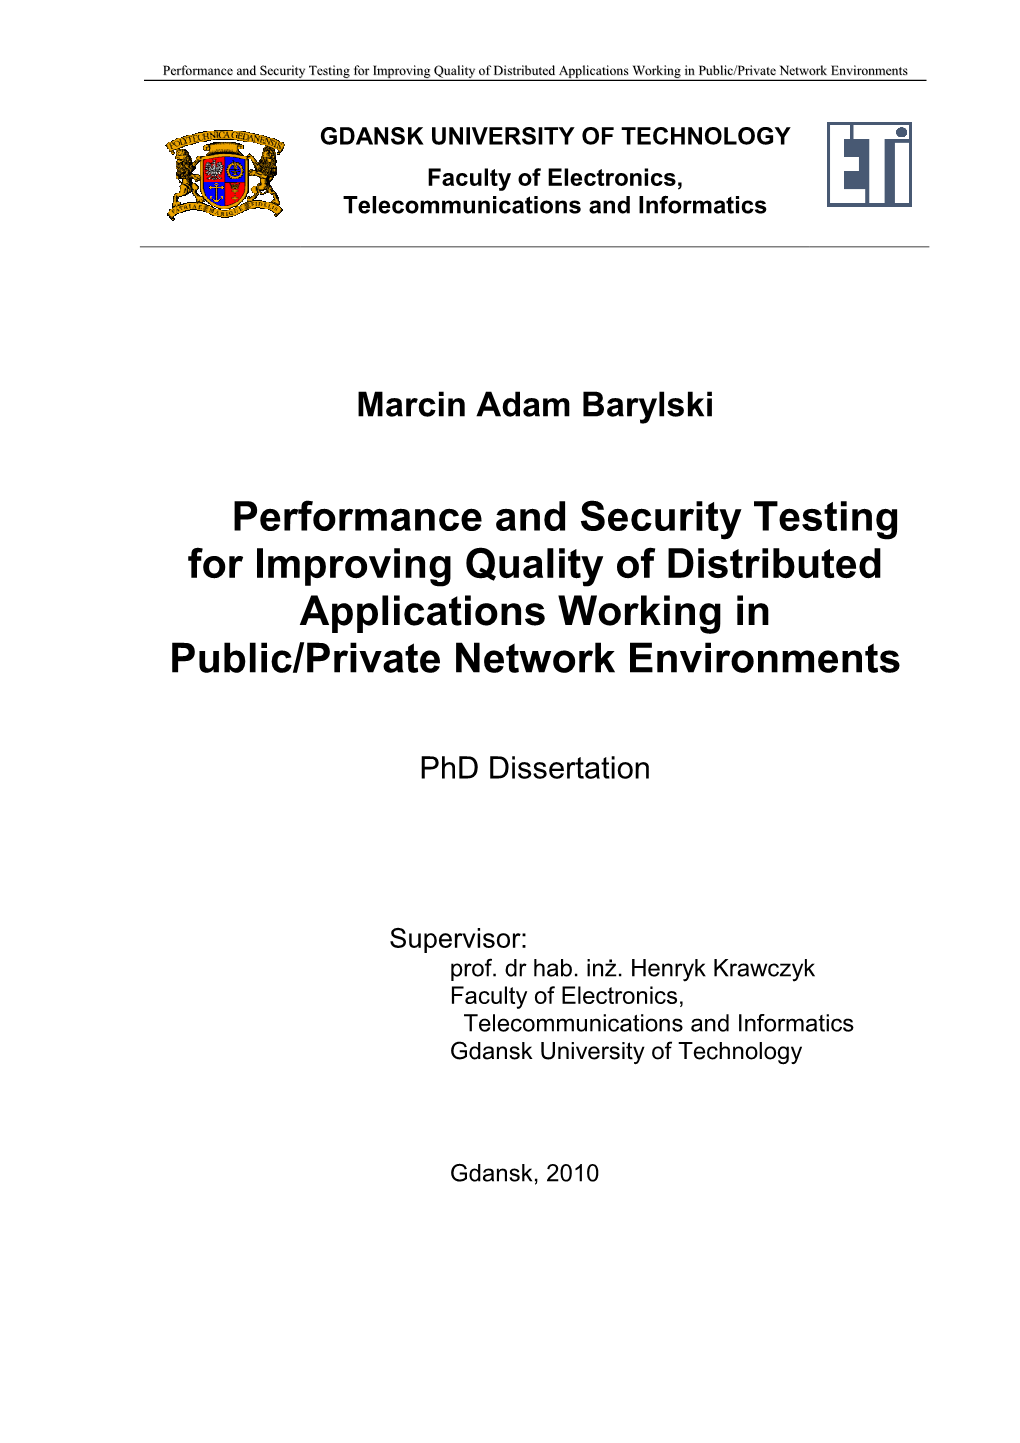 Security and Performance Testing for Improving Quality of Distributed Applications Working in Public-Private Network Infrastructures